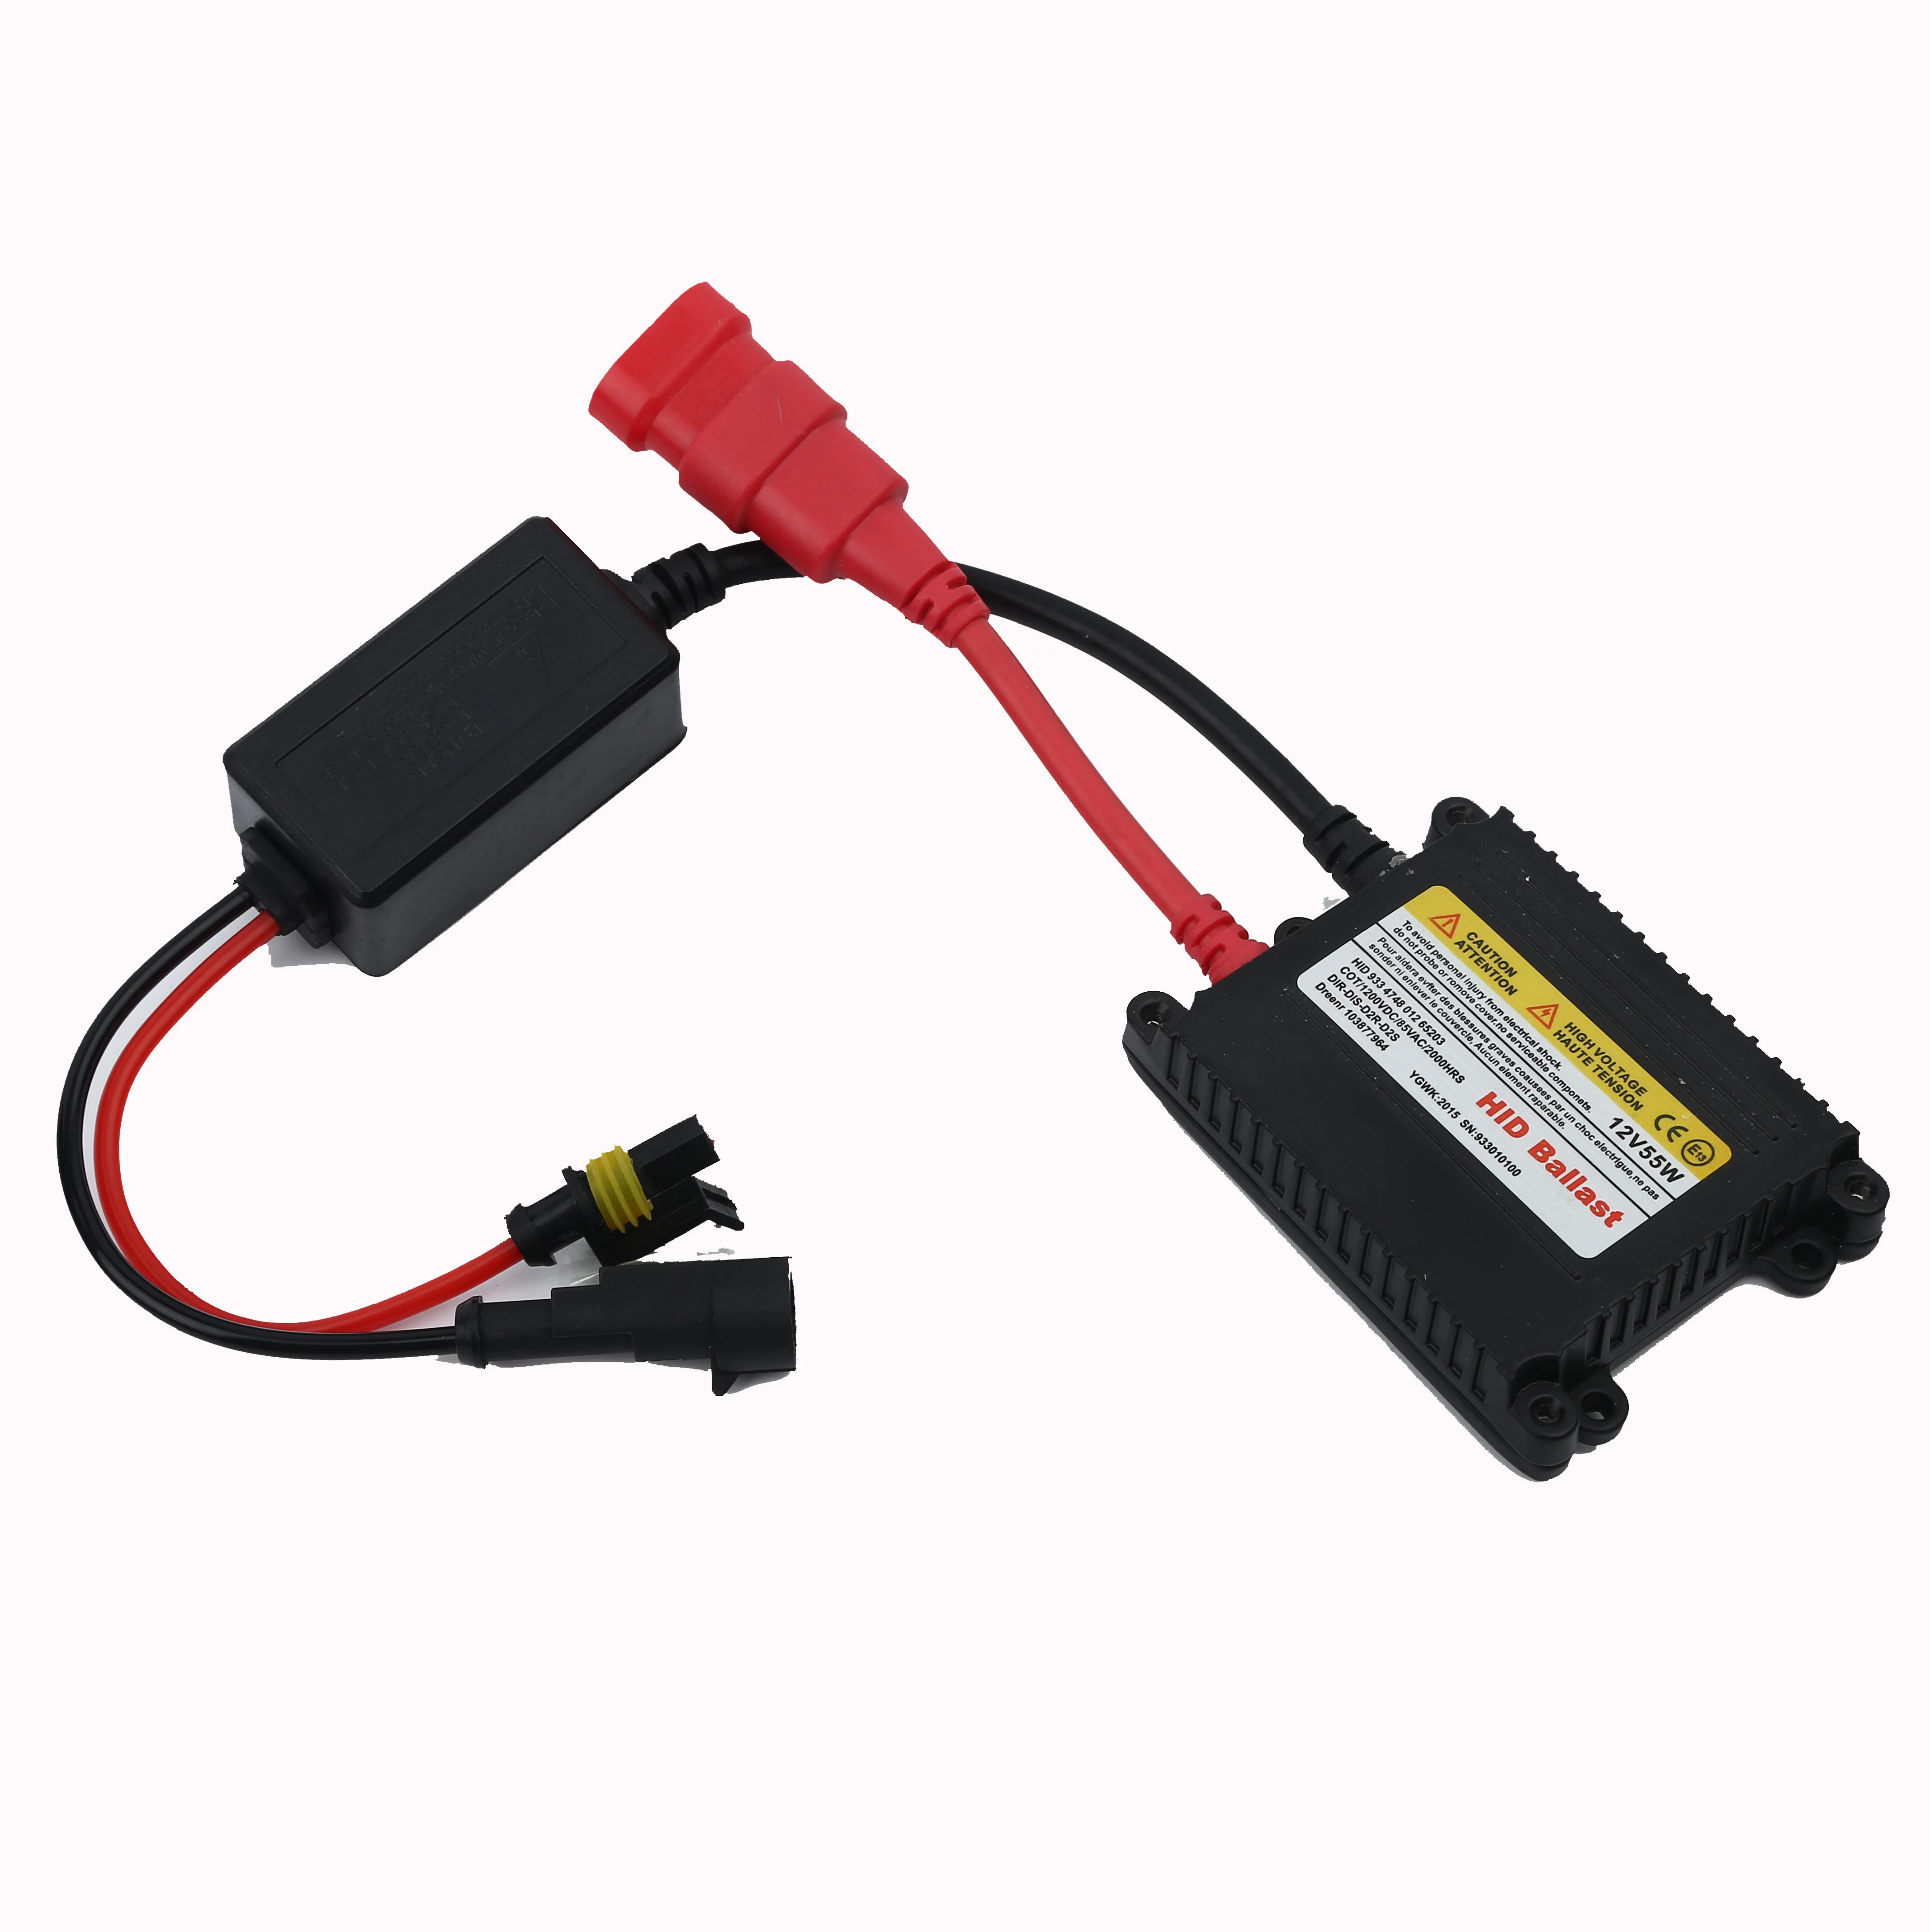 Hid Xenon Ballast Electronic Digital Control Ballast Kit hid xenon ballast 35W Digital  hid ballastblocks ignition Electronic